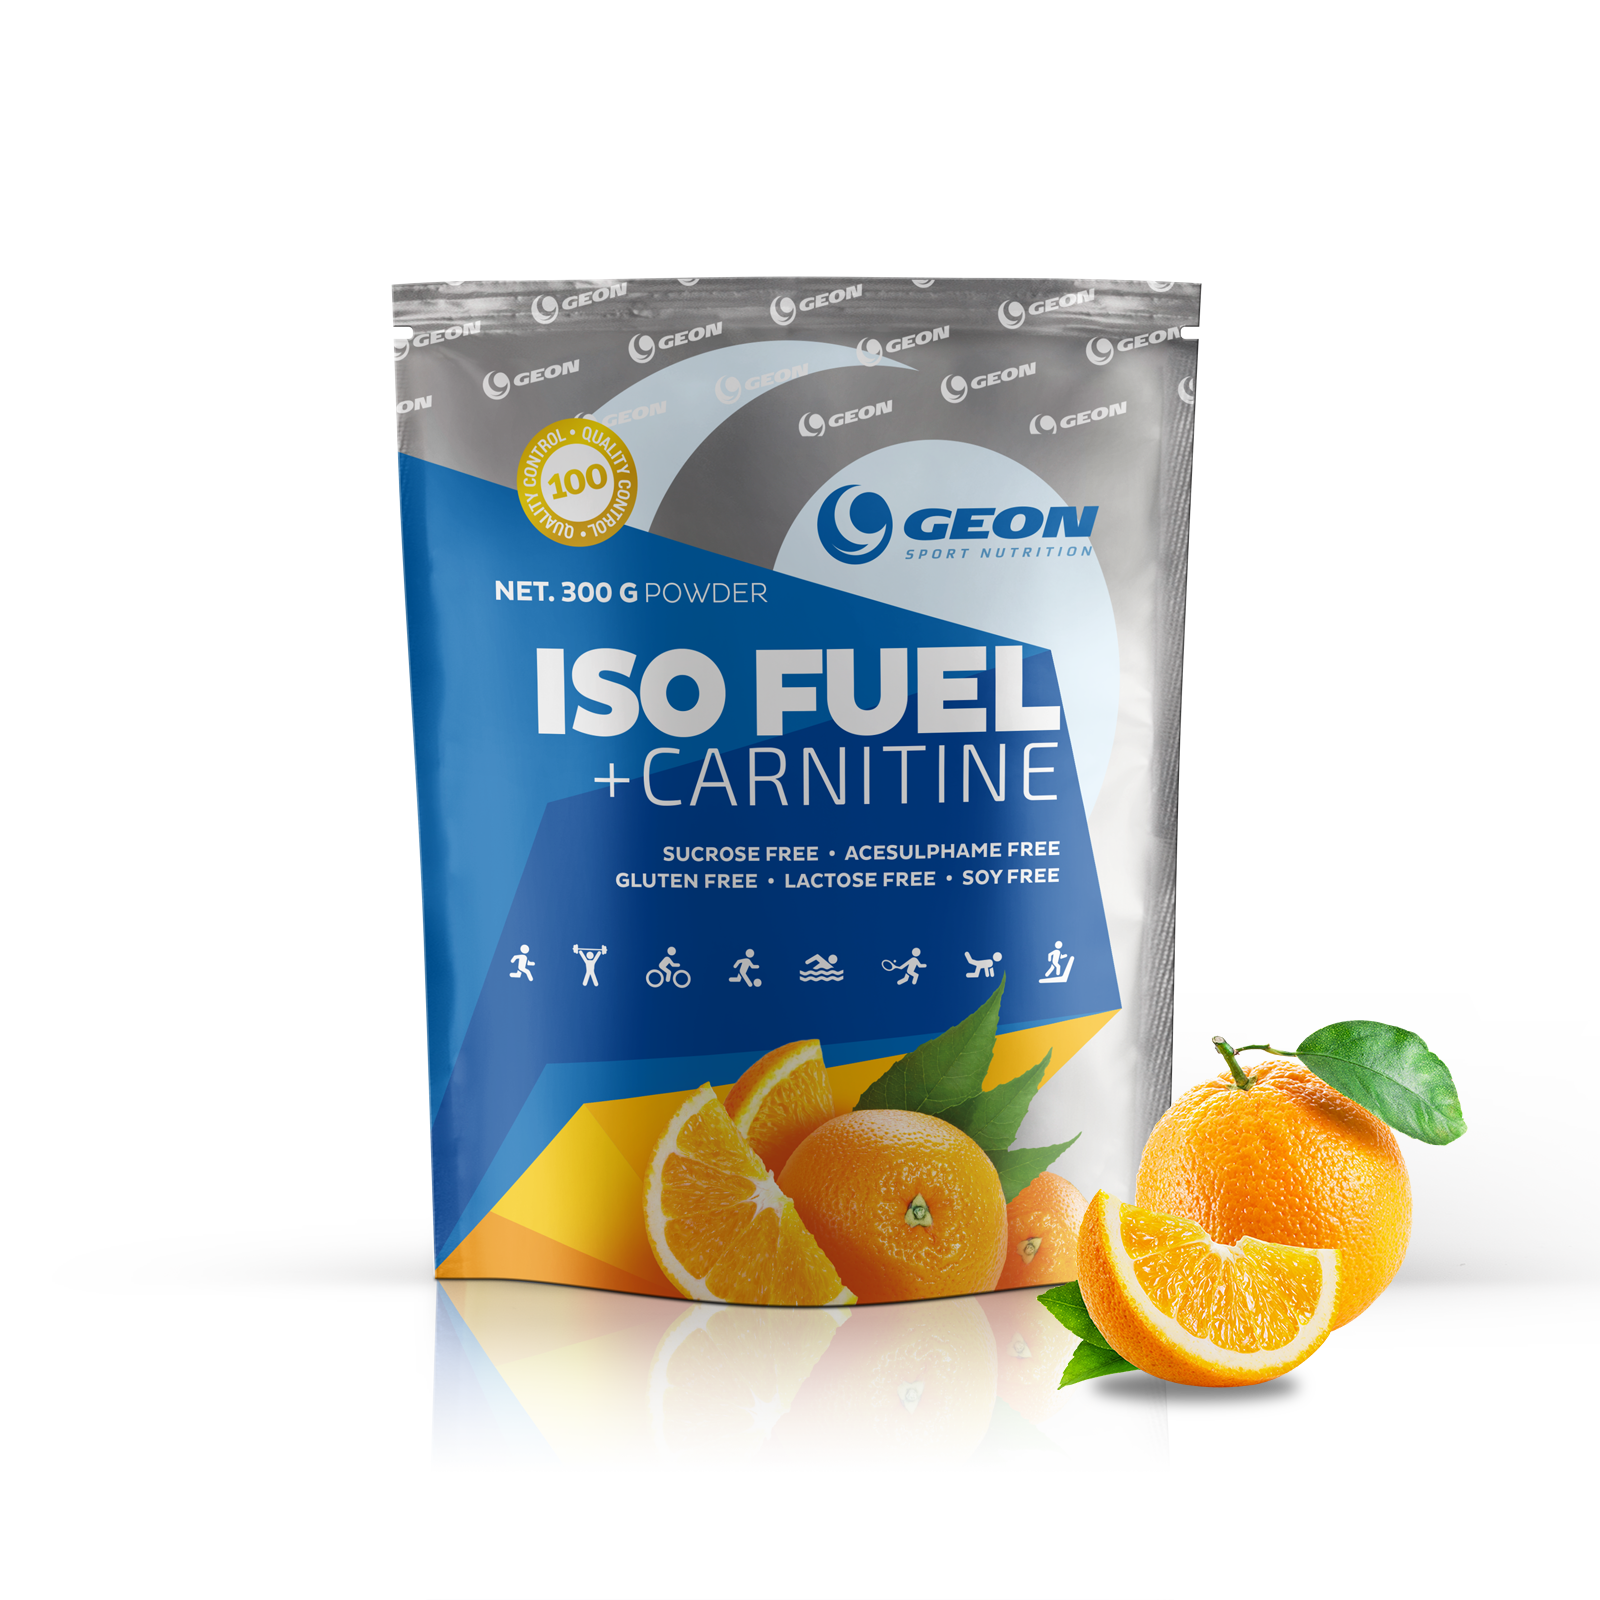 GEON Iso Fuel+Carnitine, 300 г, вкус: апельсин